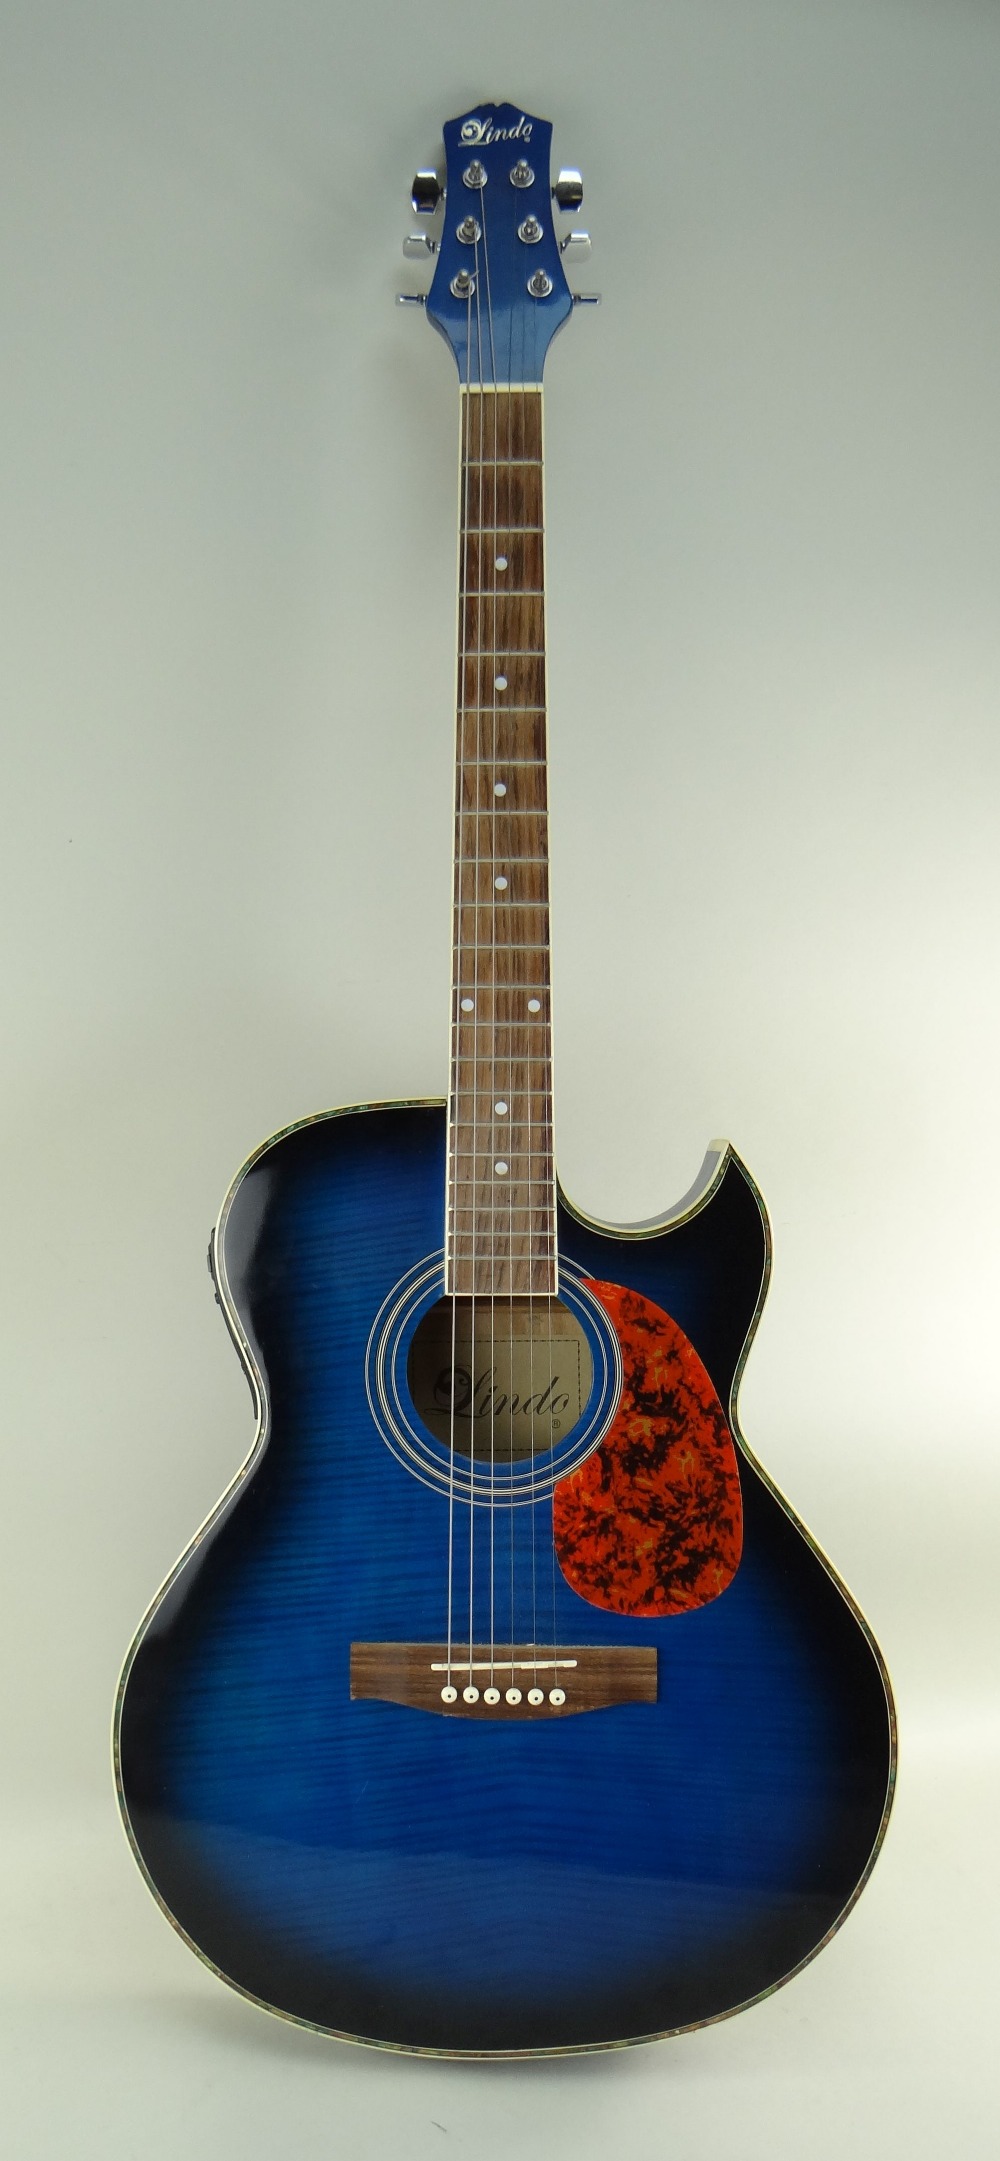 LINDO SLIM ELECTRO-ACOUSTIC GUITAR, blue sunburst finish with simulated mother of pearl border, - Image 4 of 5